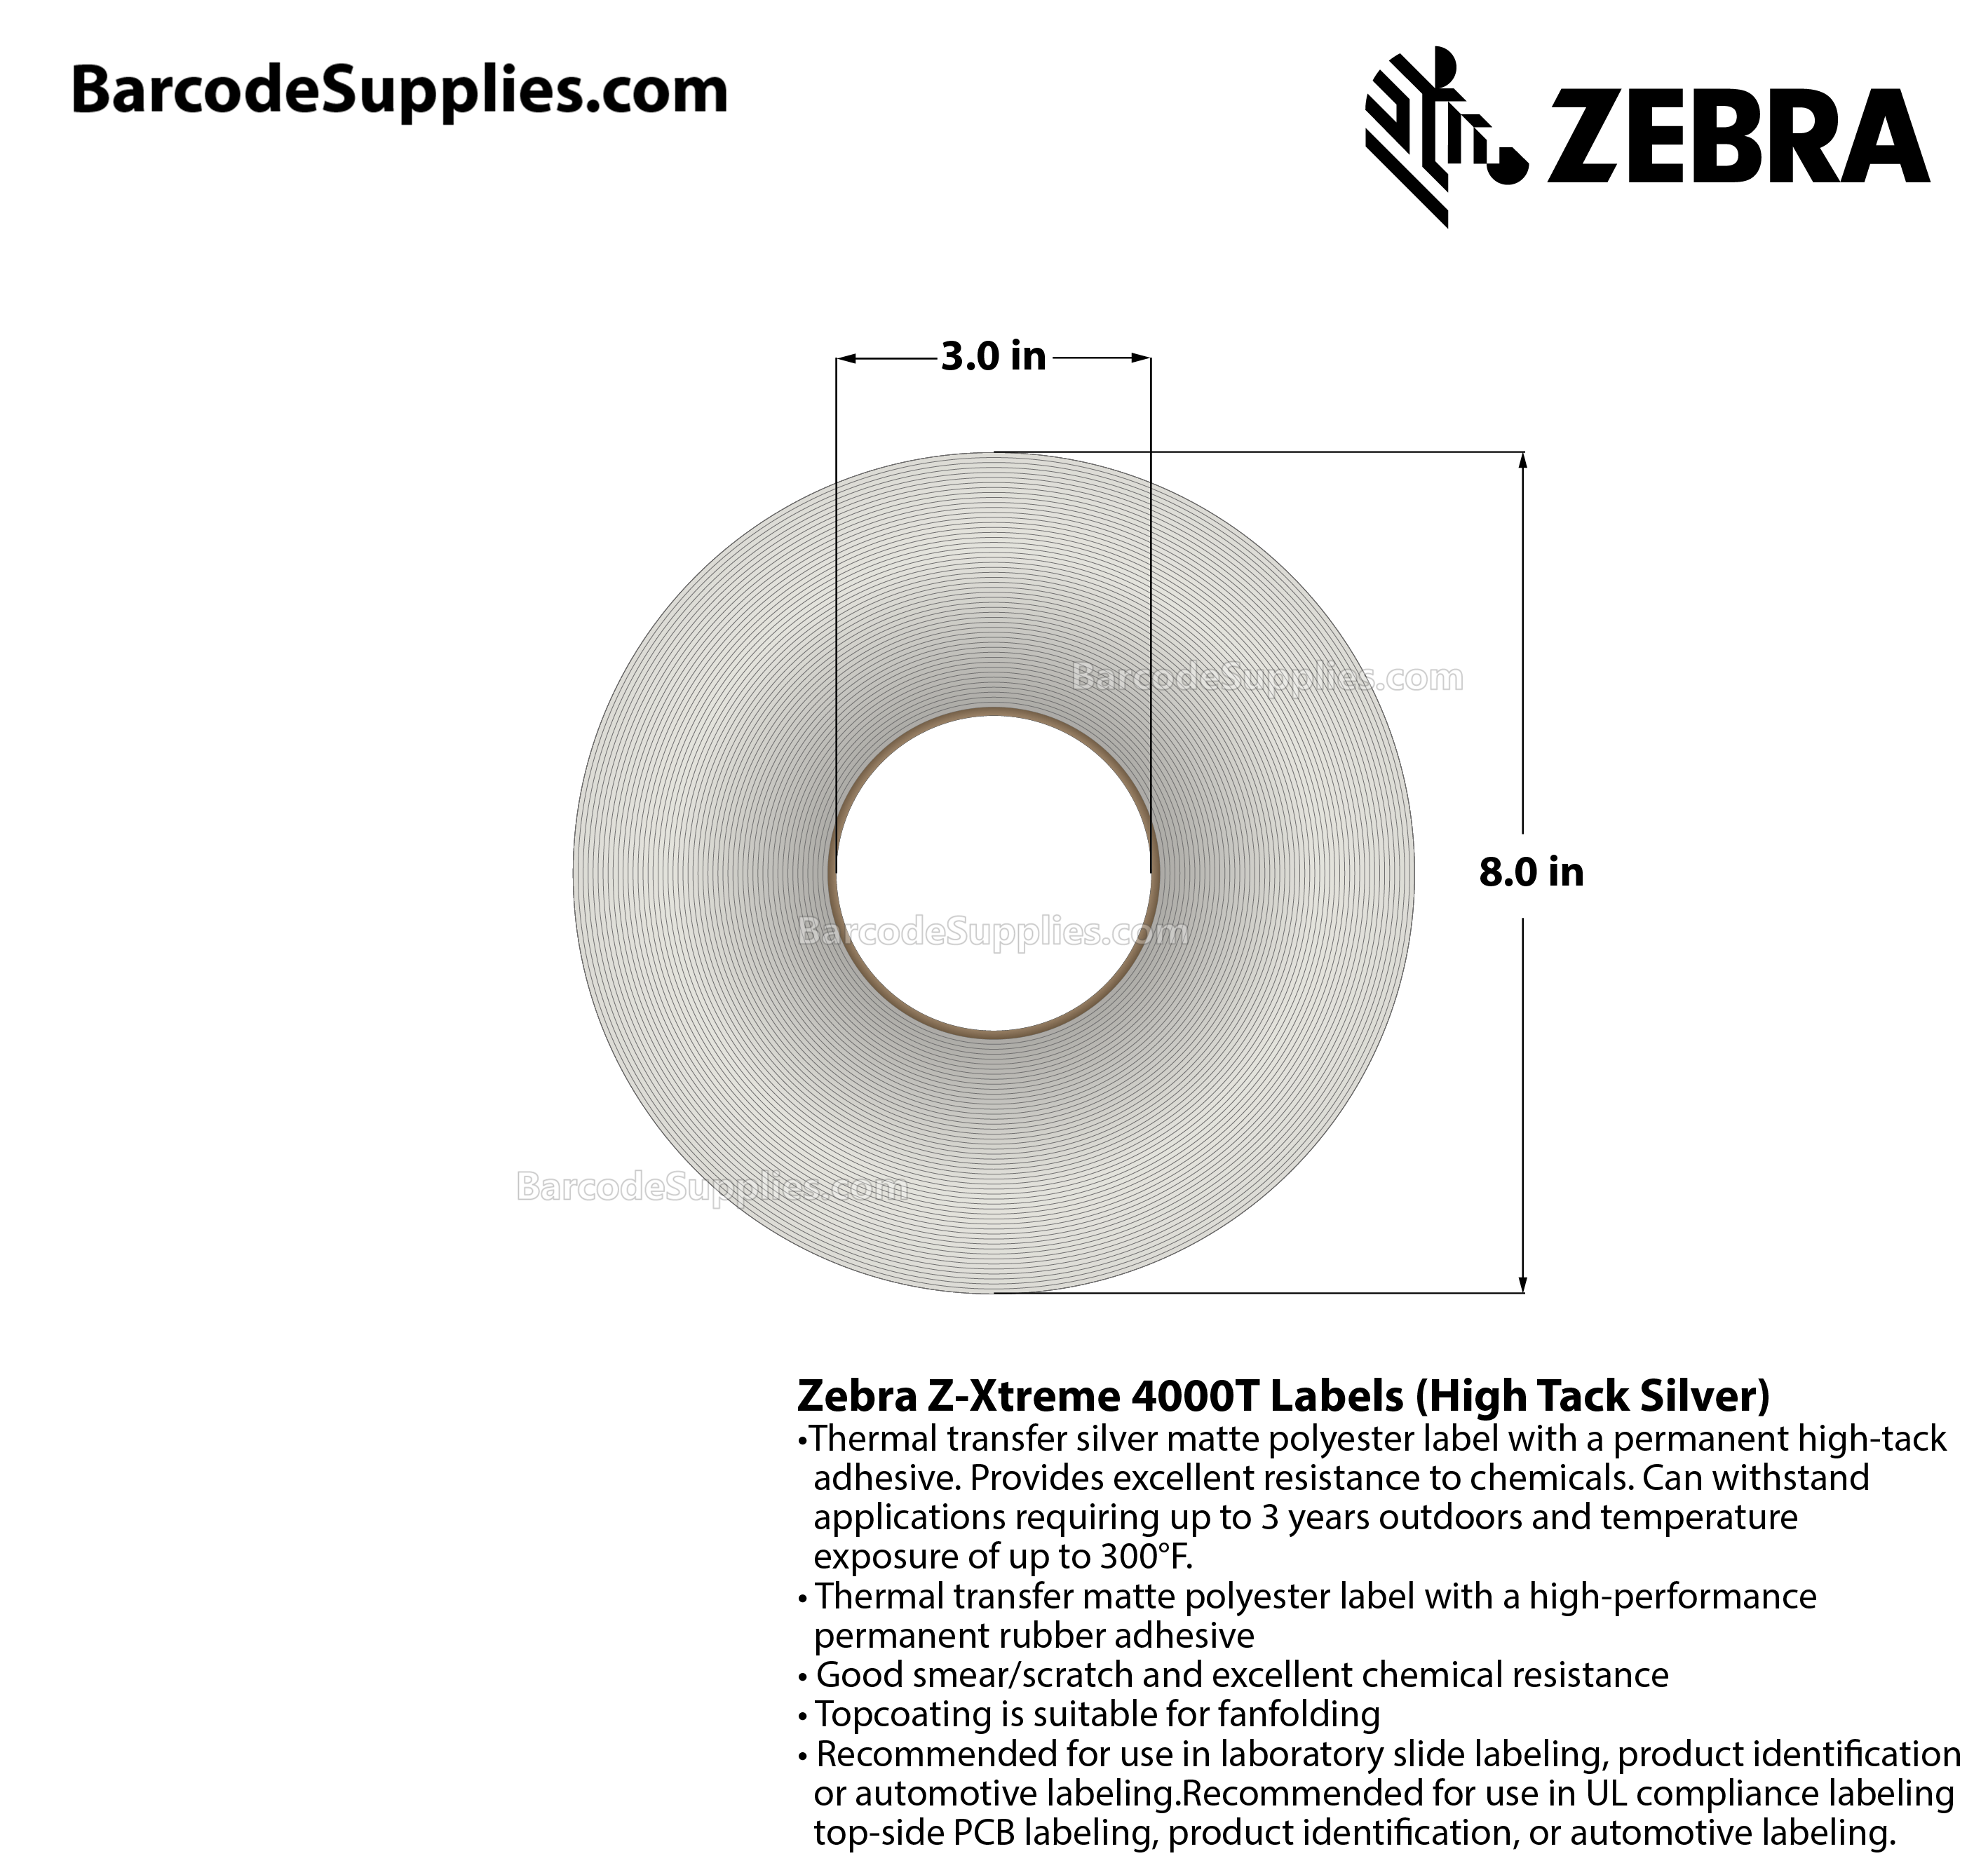 1.5 x 0.5 Thermal Transfer Silver Z-Xtreme 4000T High-Tack Silver (2-Across) Labels With High-tack Adhesive - Perforated - 10000 Labels Per Roll - Carton Of 1 Rolls - 10000 Labels Total - MPN: 10023171